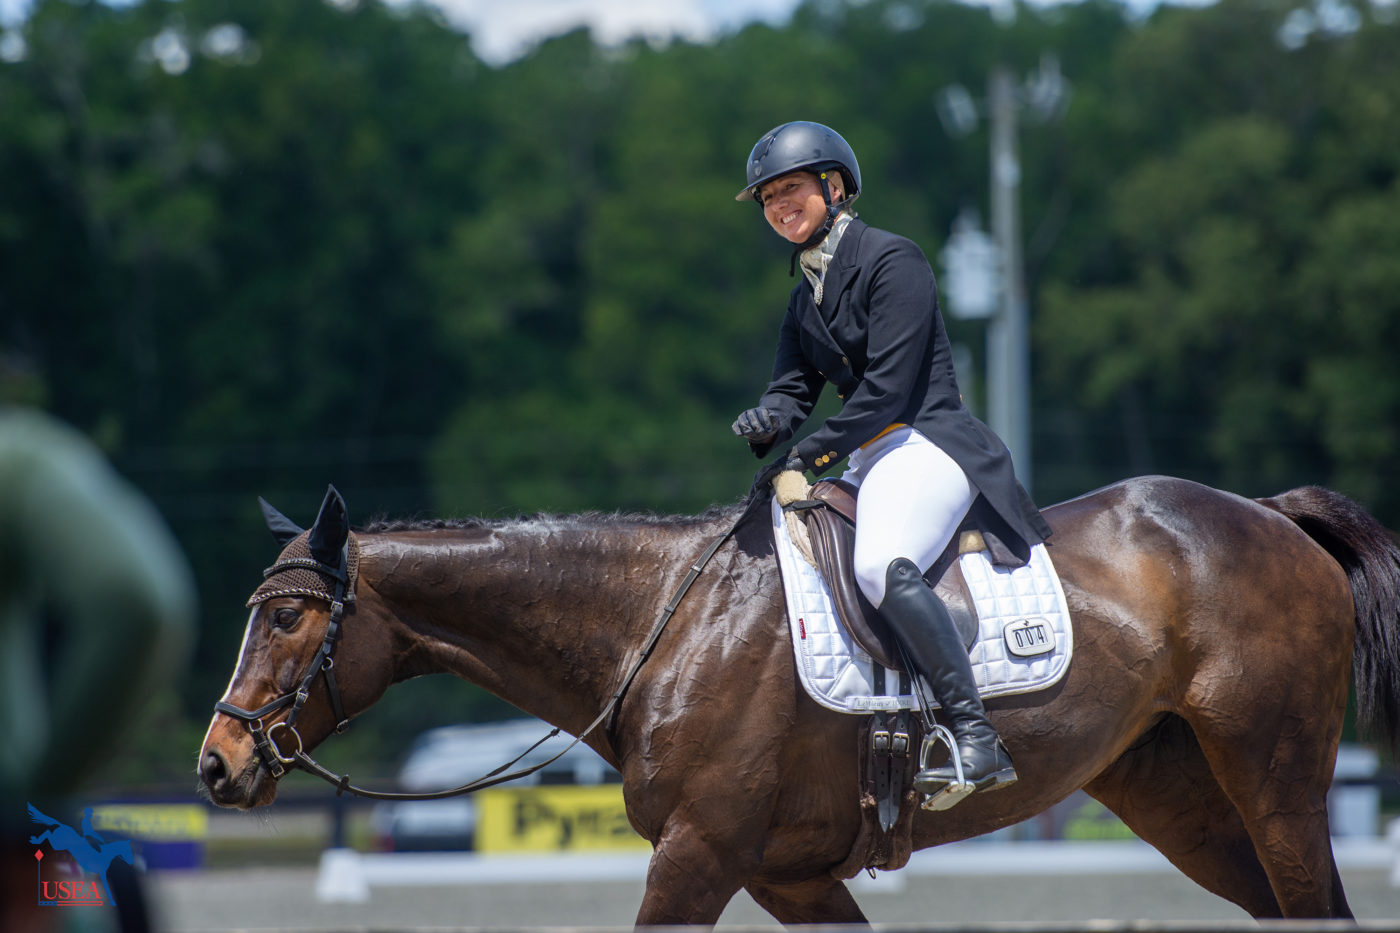 Siobhain O'Connor was thrilled with her ride on Summer Solstice for Canada. USEA/Shelby Allen photo